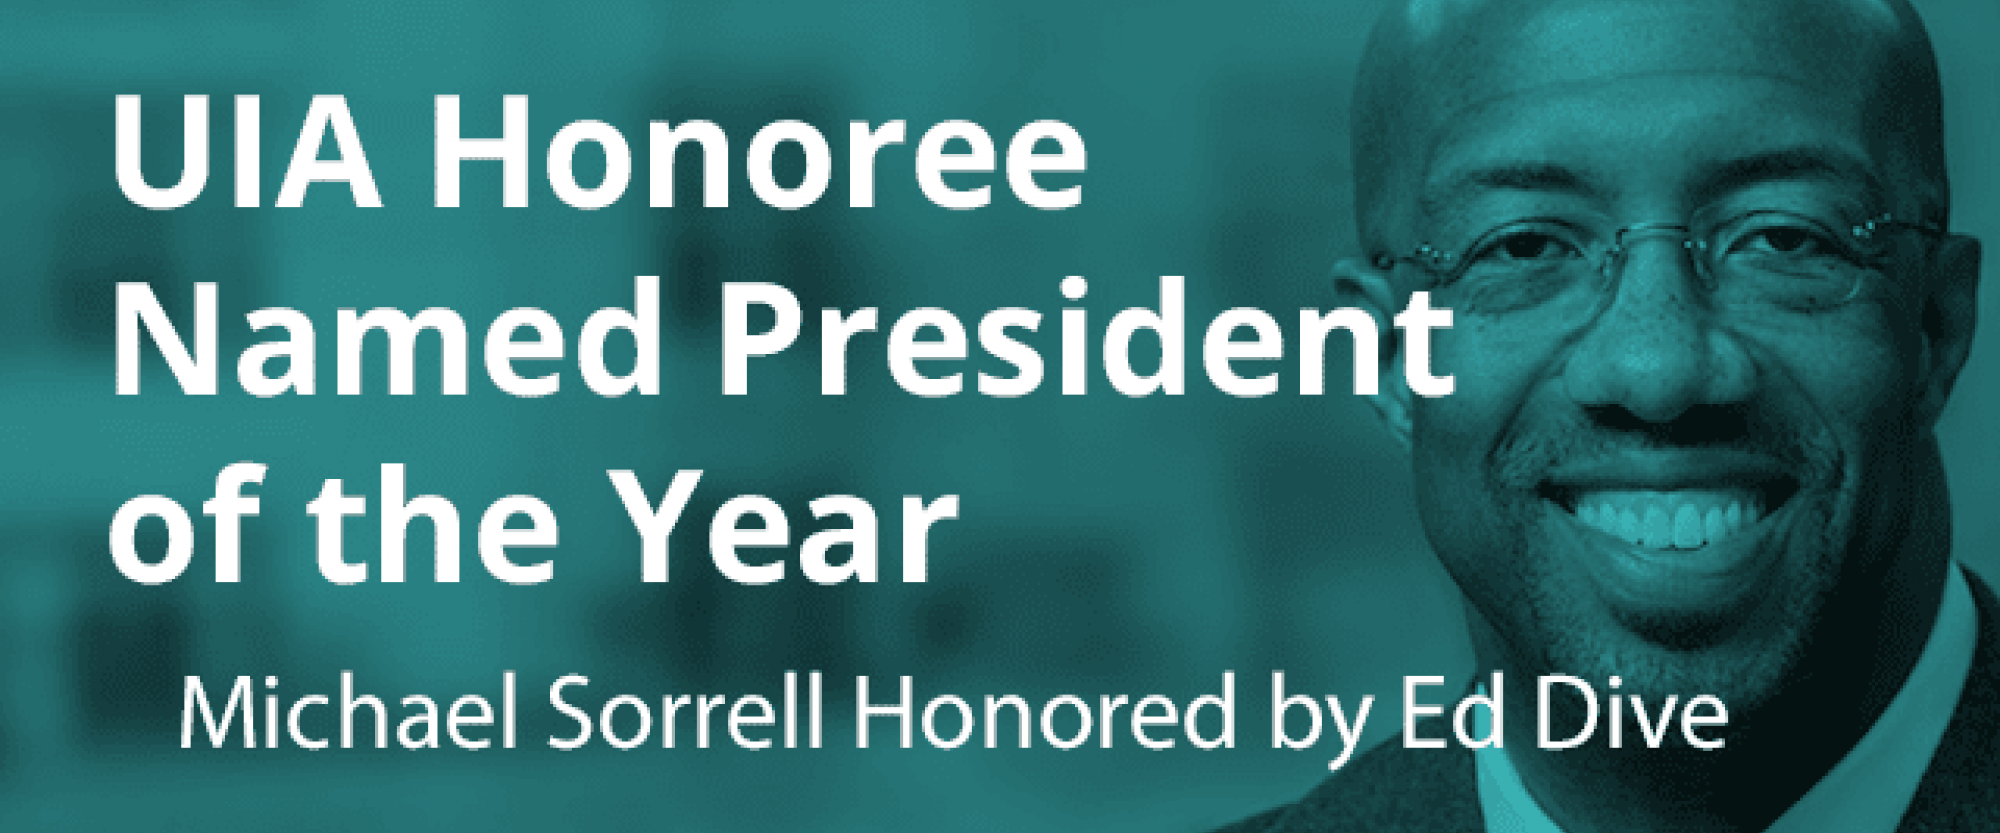 UIA Honoree Michael Sorrell Named Ed Dive's President of the Year